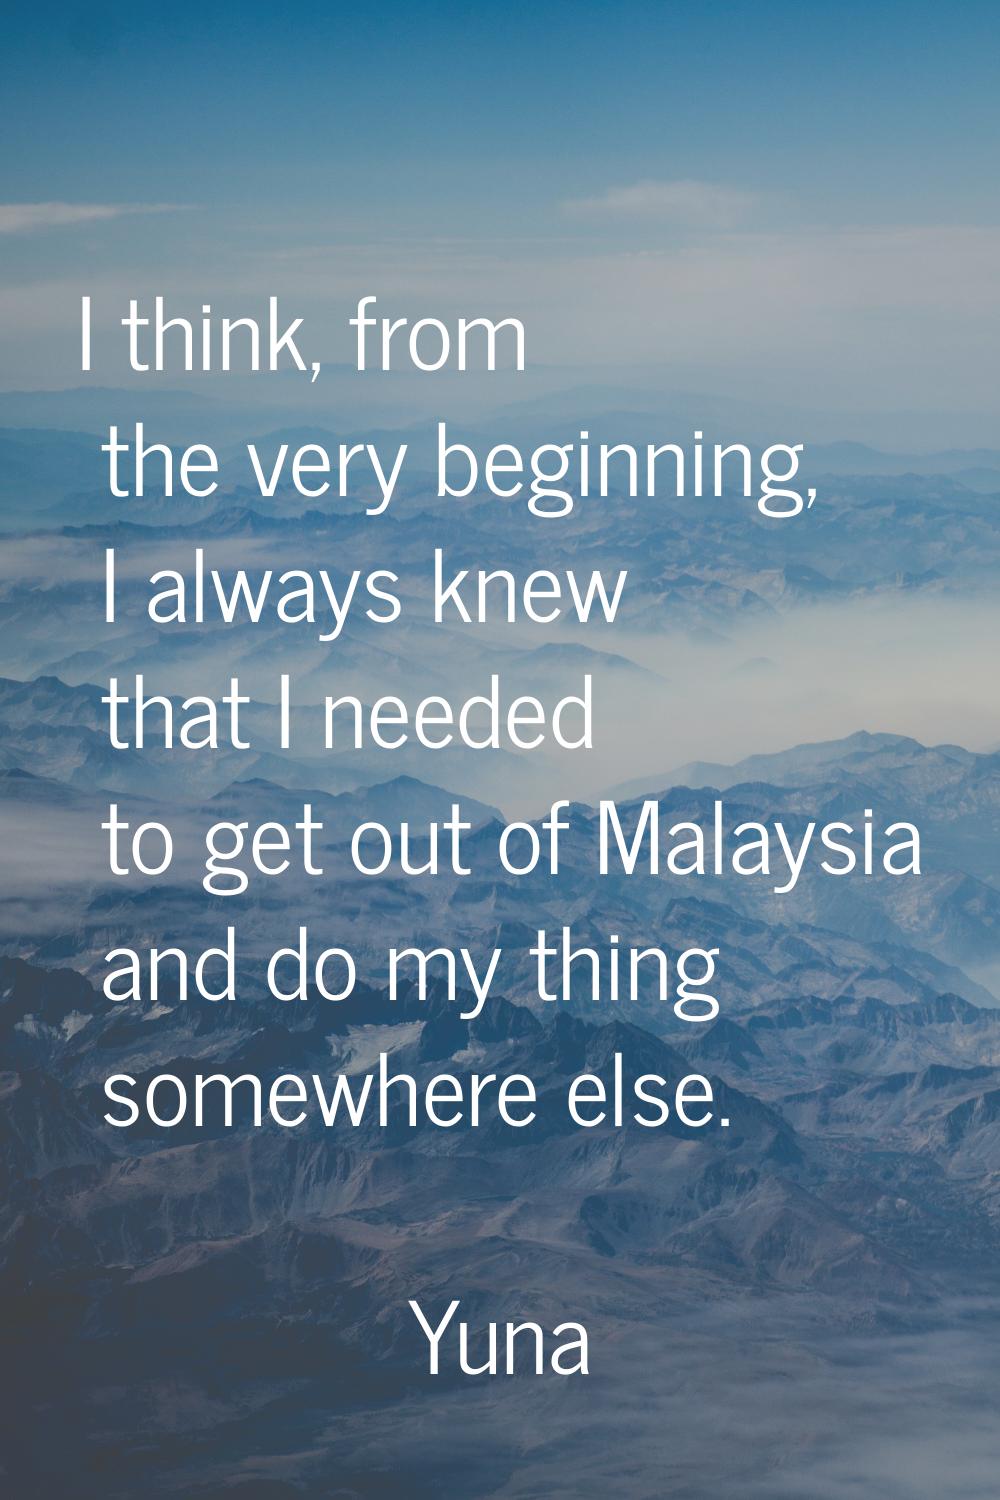 I think, from the very beginning, I always knew that I needed to get out of Malaysia and do my thin